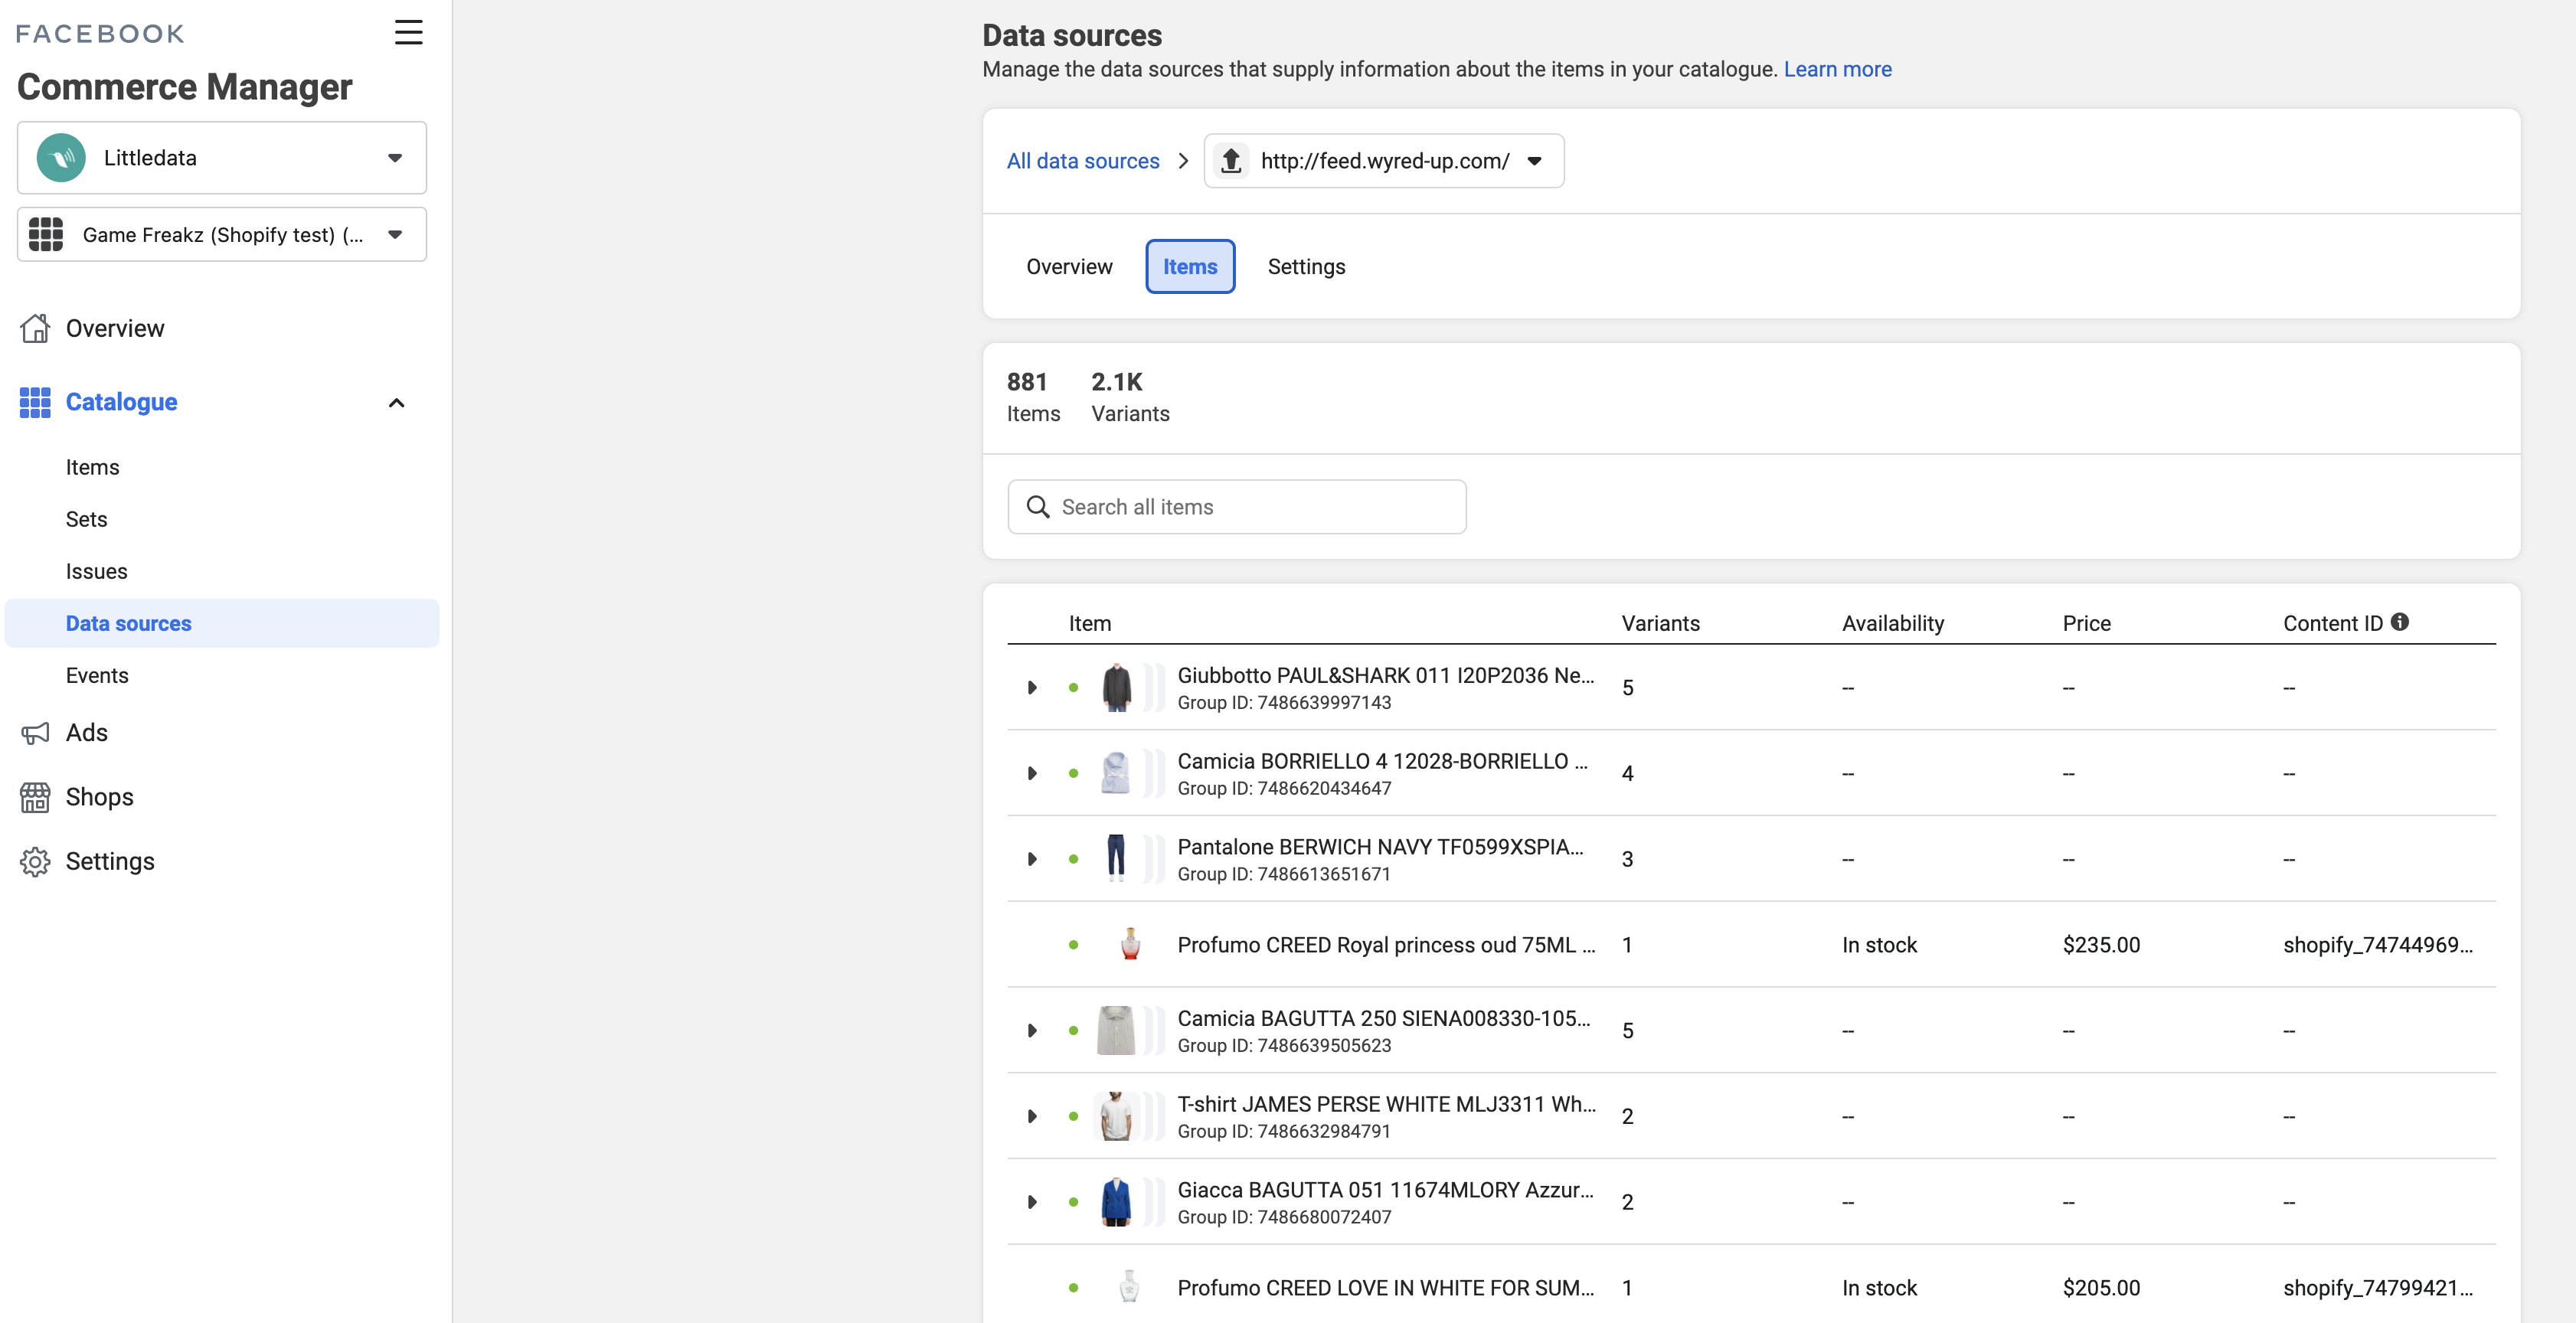 View product items in Commerce Manager